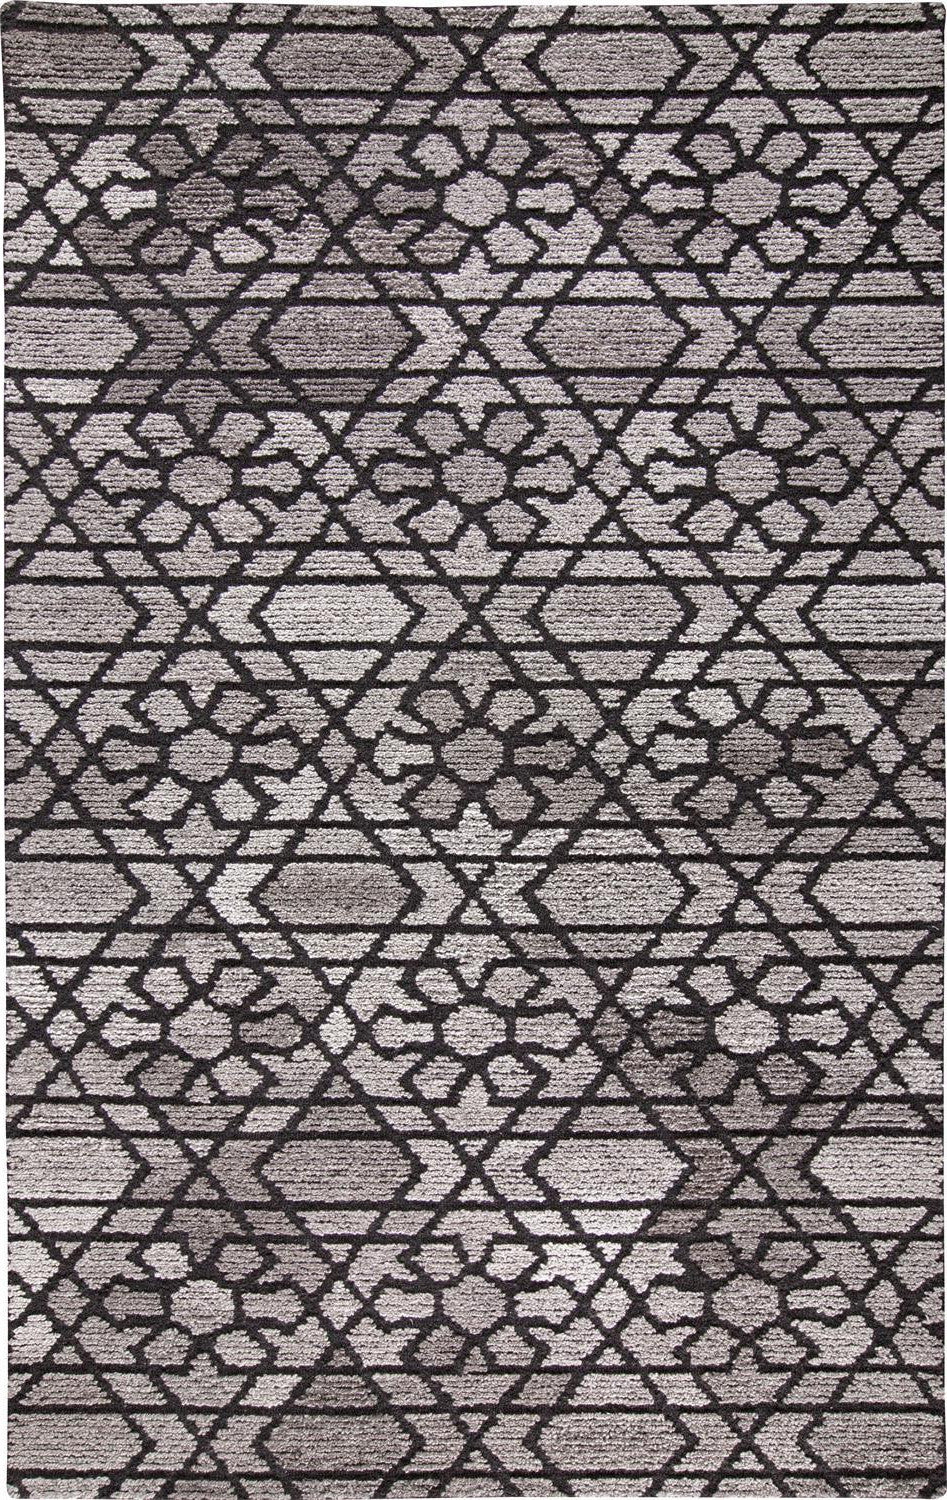 4' X 6' Taupe Black And Gray Wool Paisley Tufted Handmade Area Rug